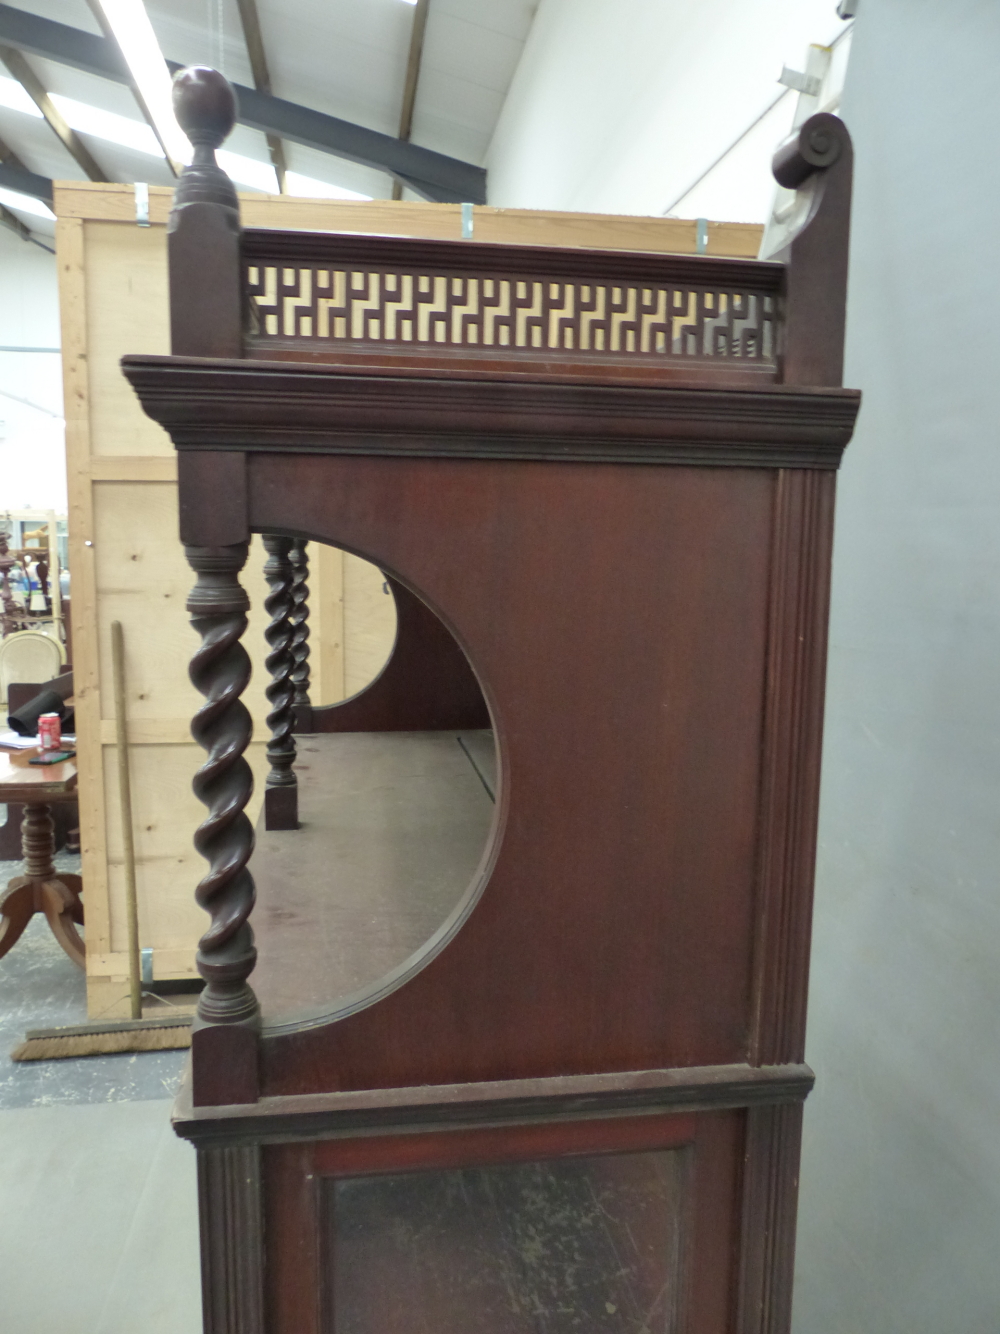 AN ARTS AND CRAFTS MORRIS STYLE MAHOGANY DISPLAY CABINET, THE TOP SHELF WITH BEVELLED GLASS MIRROR - Image 7 of 12